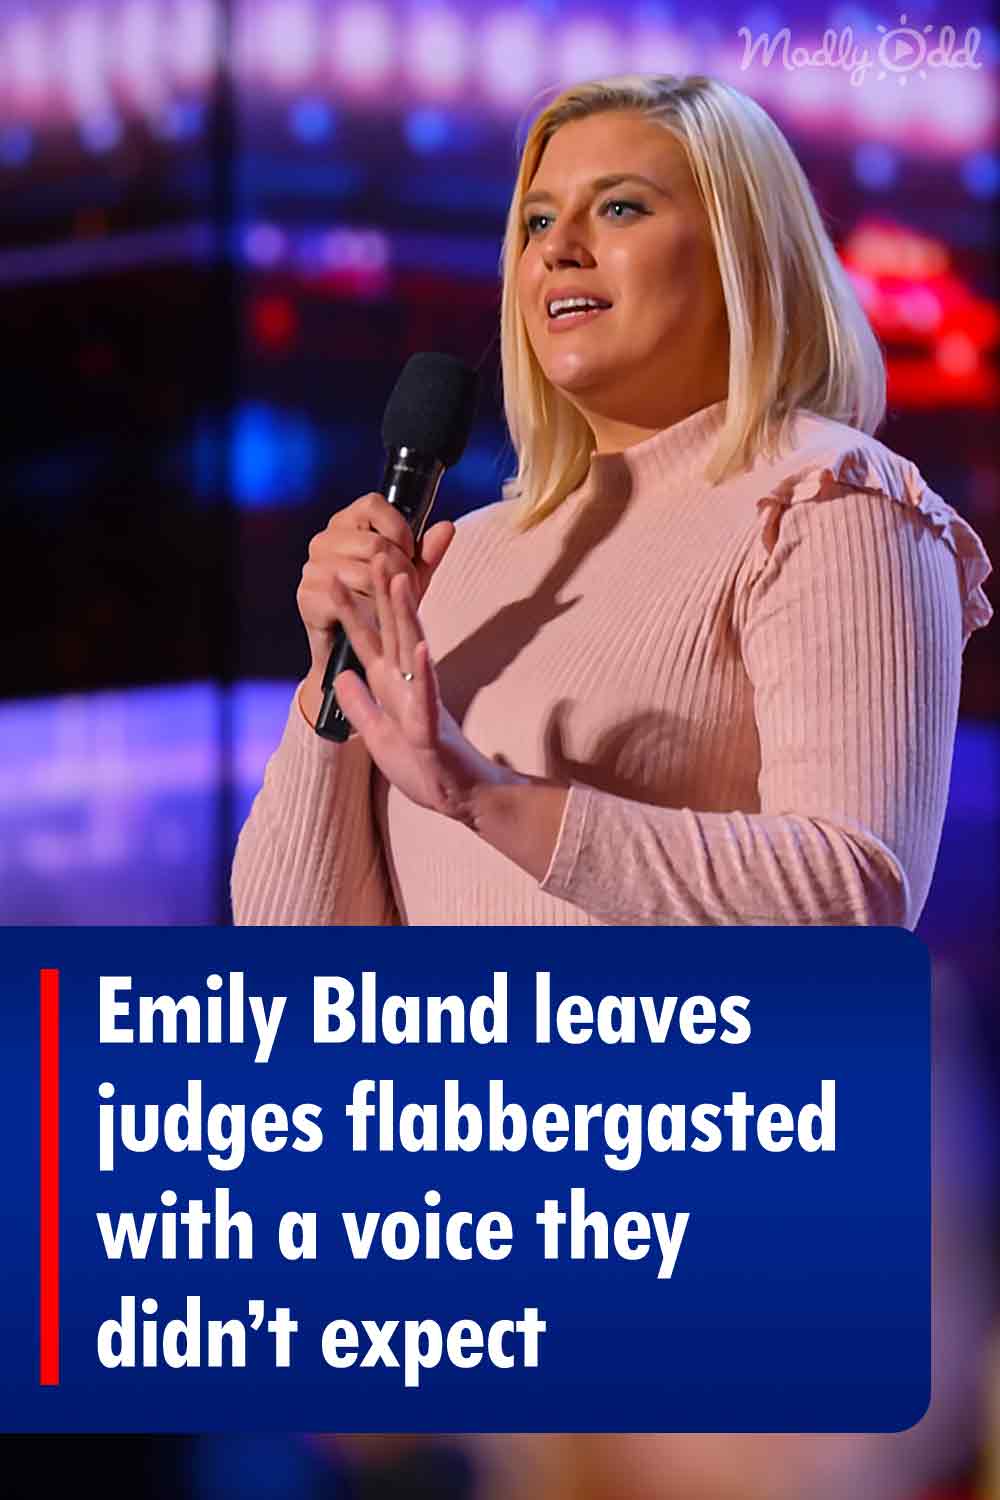 Emily Bland leaves judges flabbergasted with a voice they didn’t expect